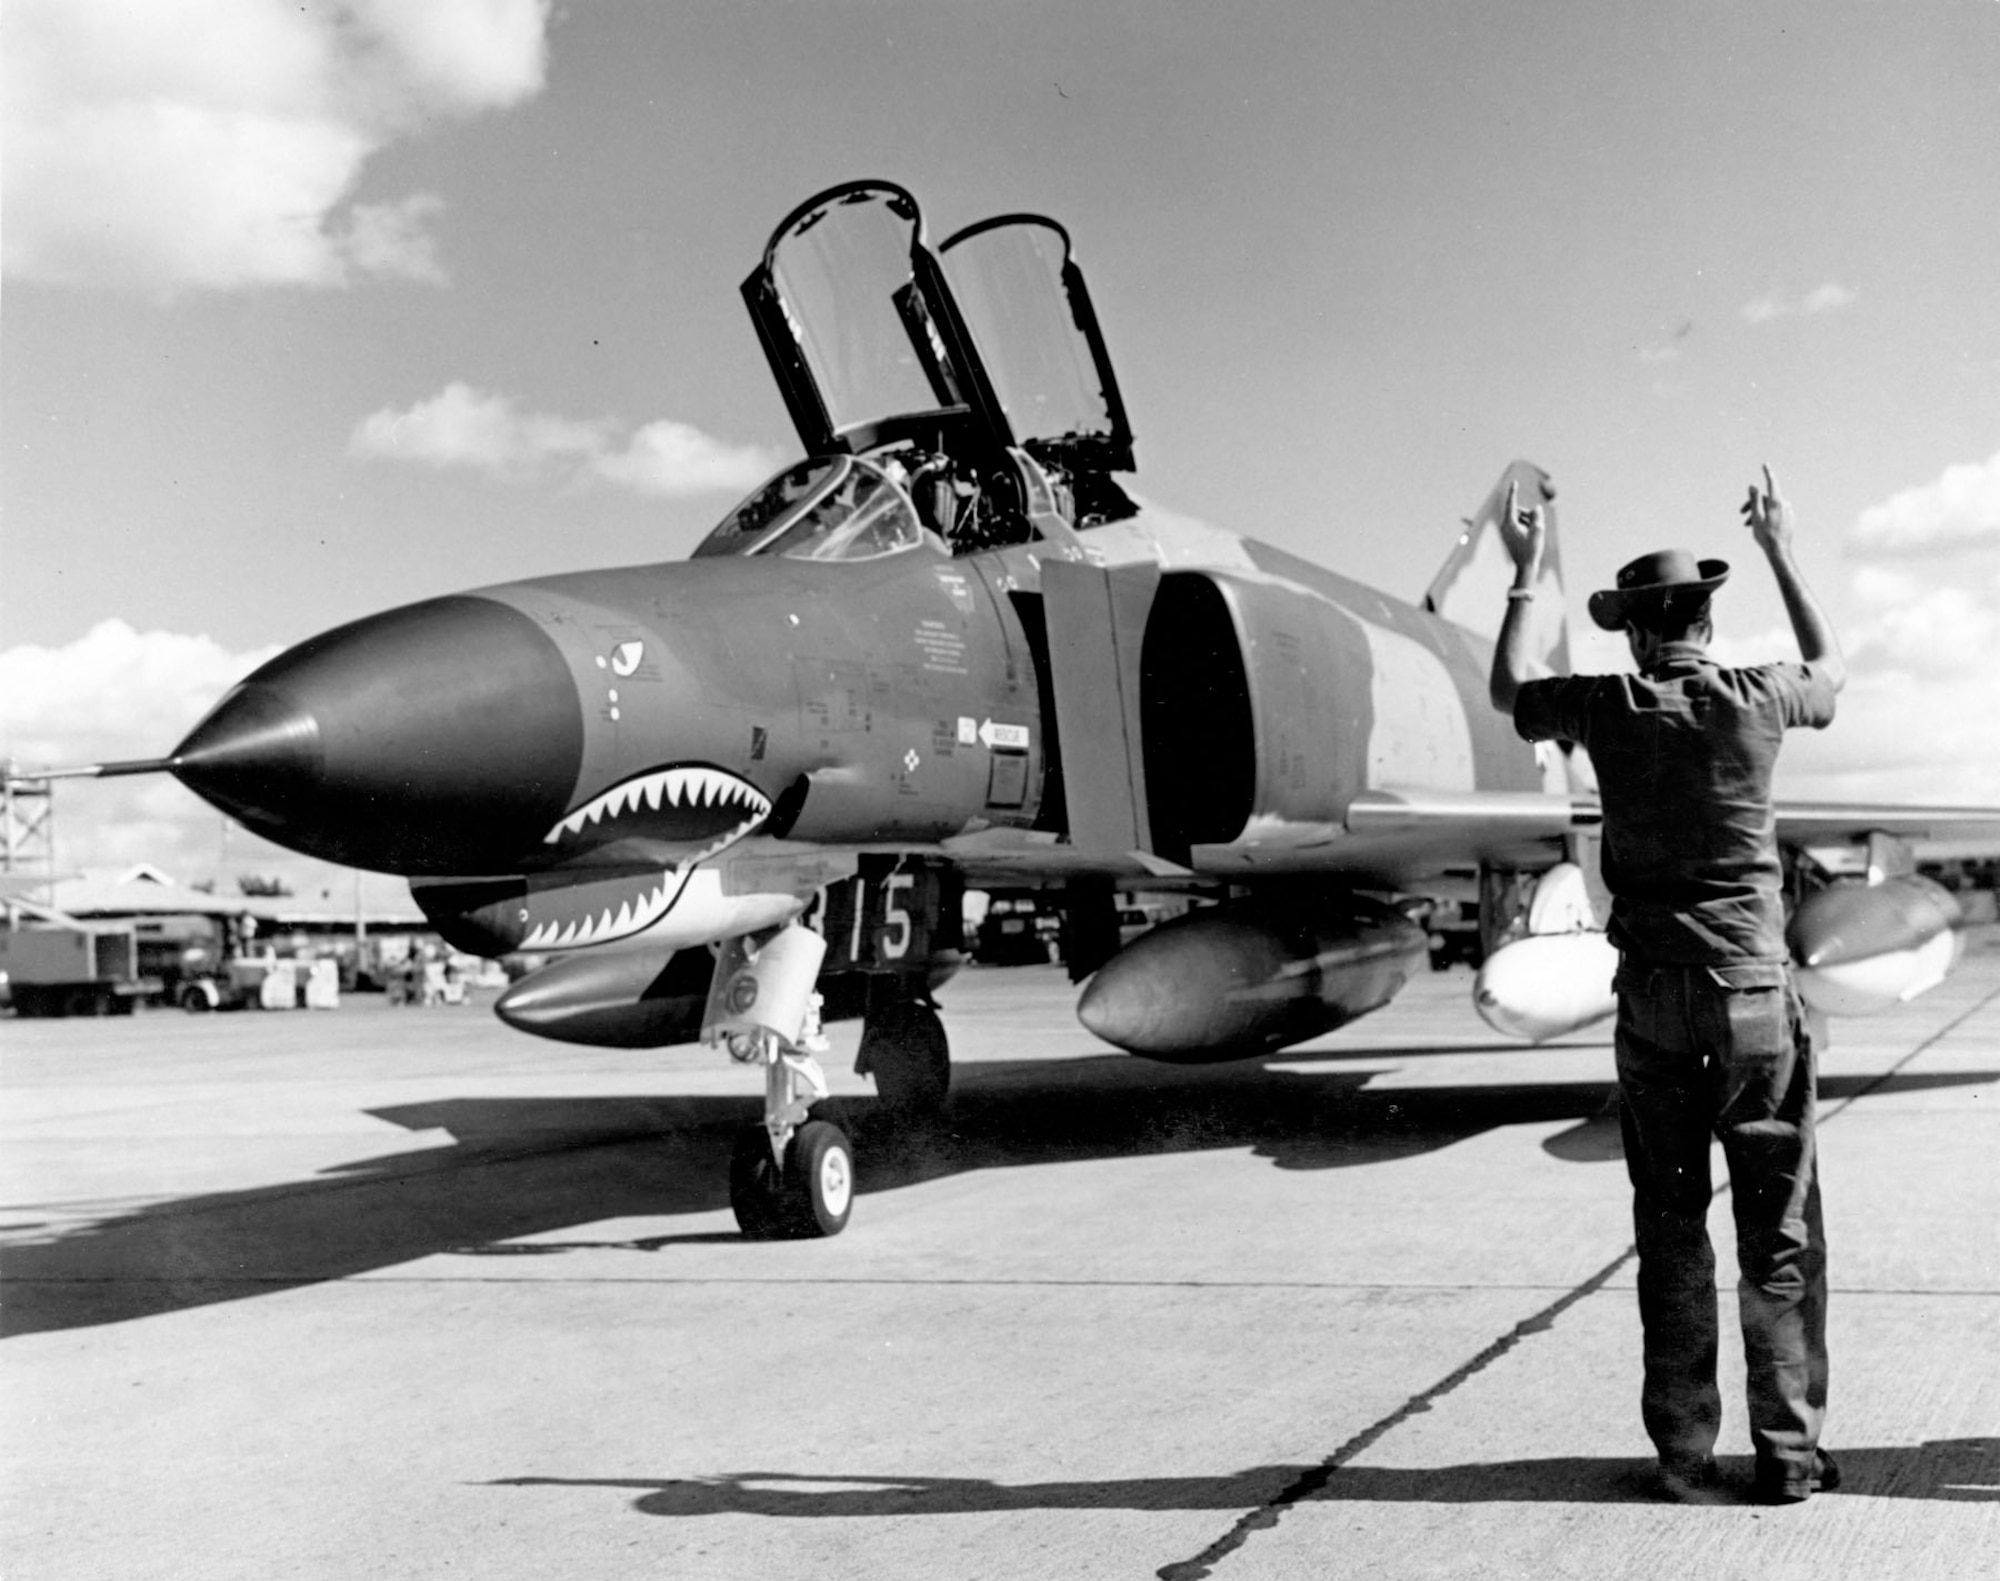 The F-4E had many improvements over earlier F-4s -- most notably its internal 20mm gun. The first F-4Es arrived in Southeast Asia in late 1968. (U.S. Air Force photo)